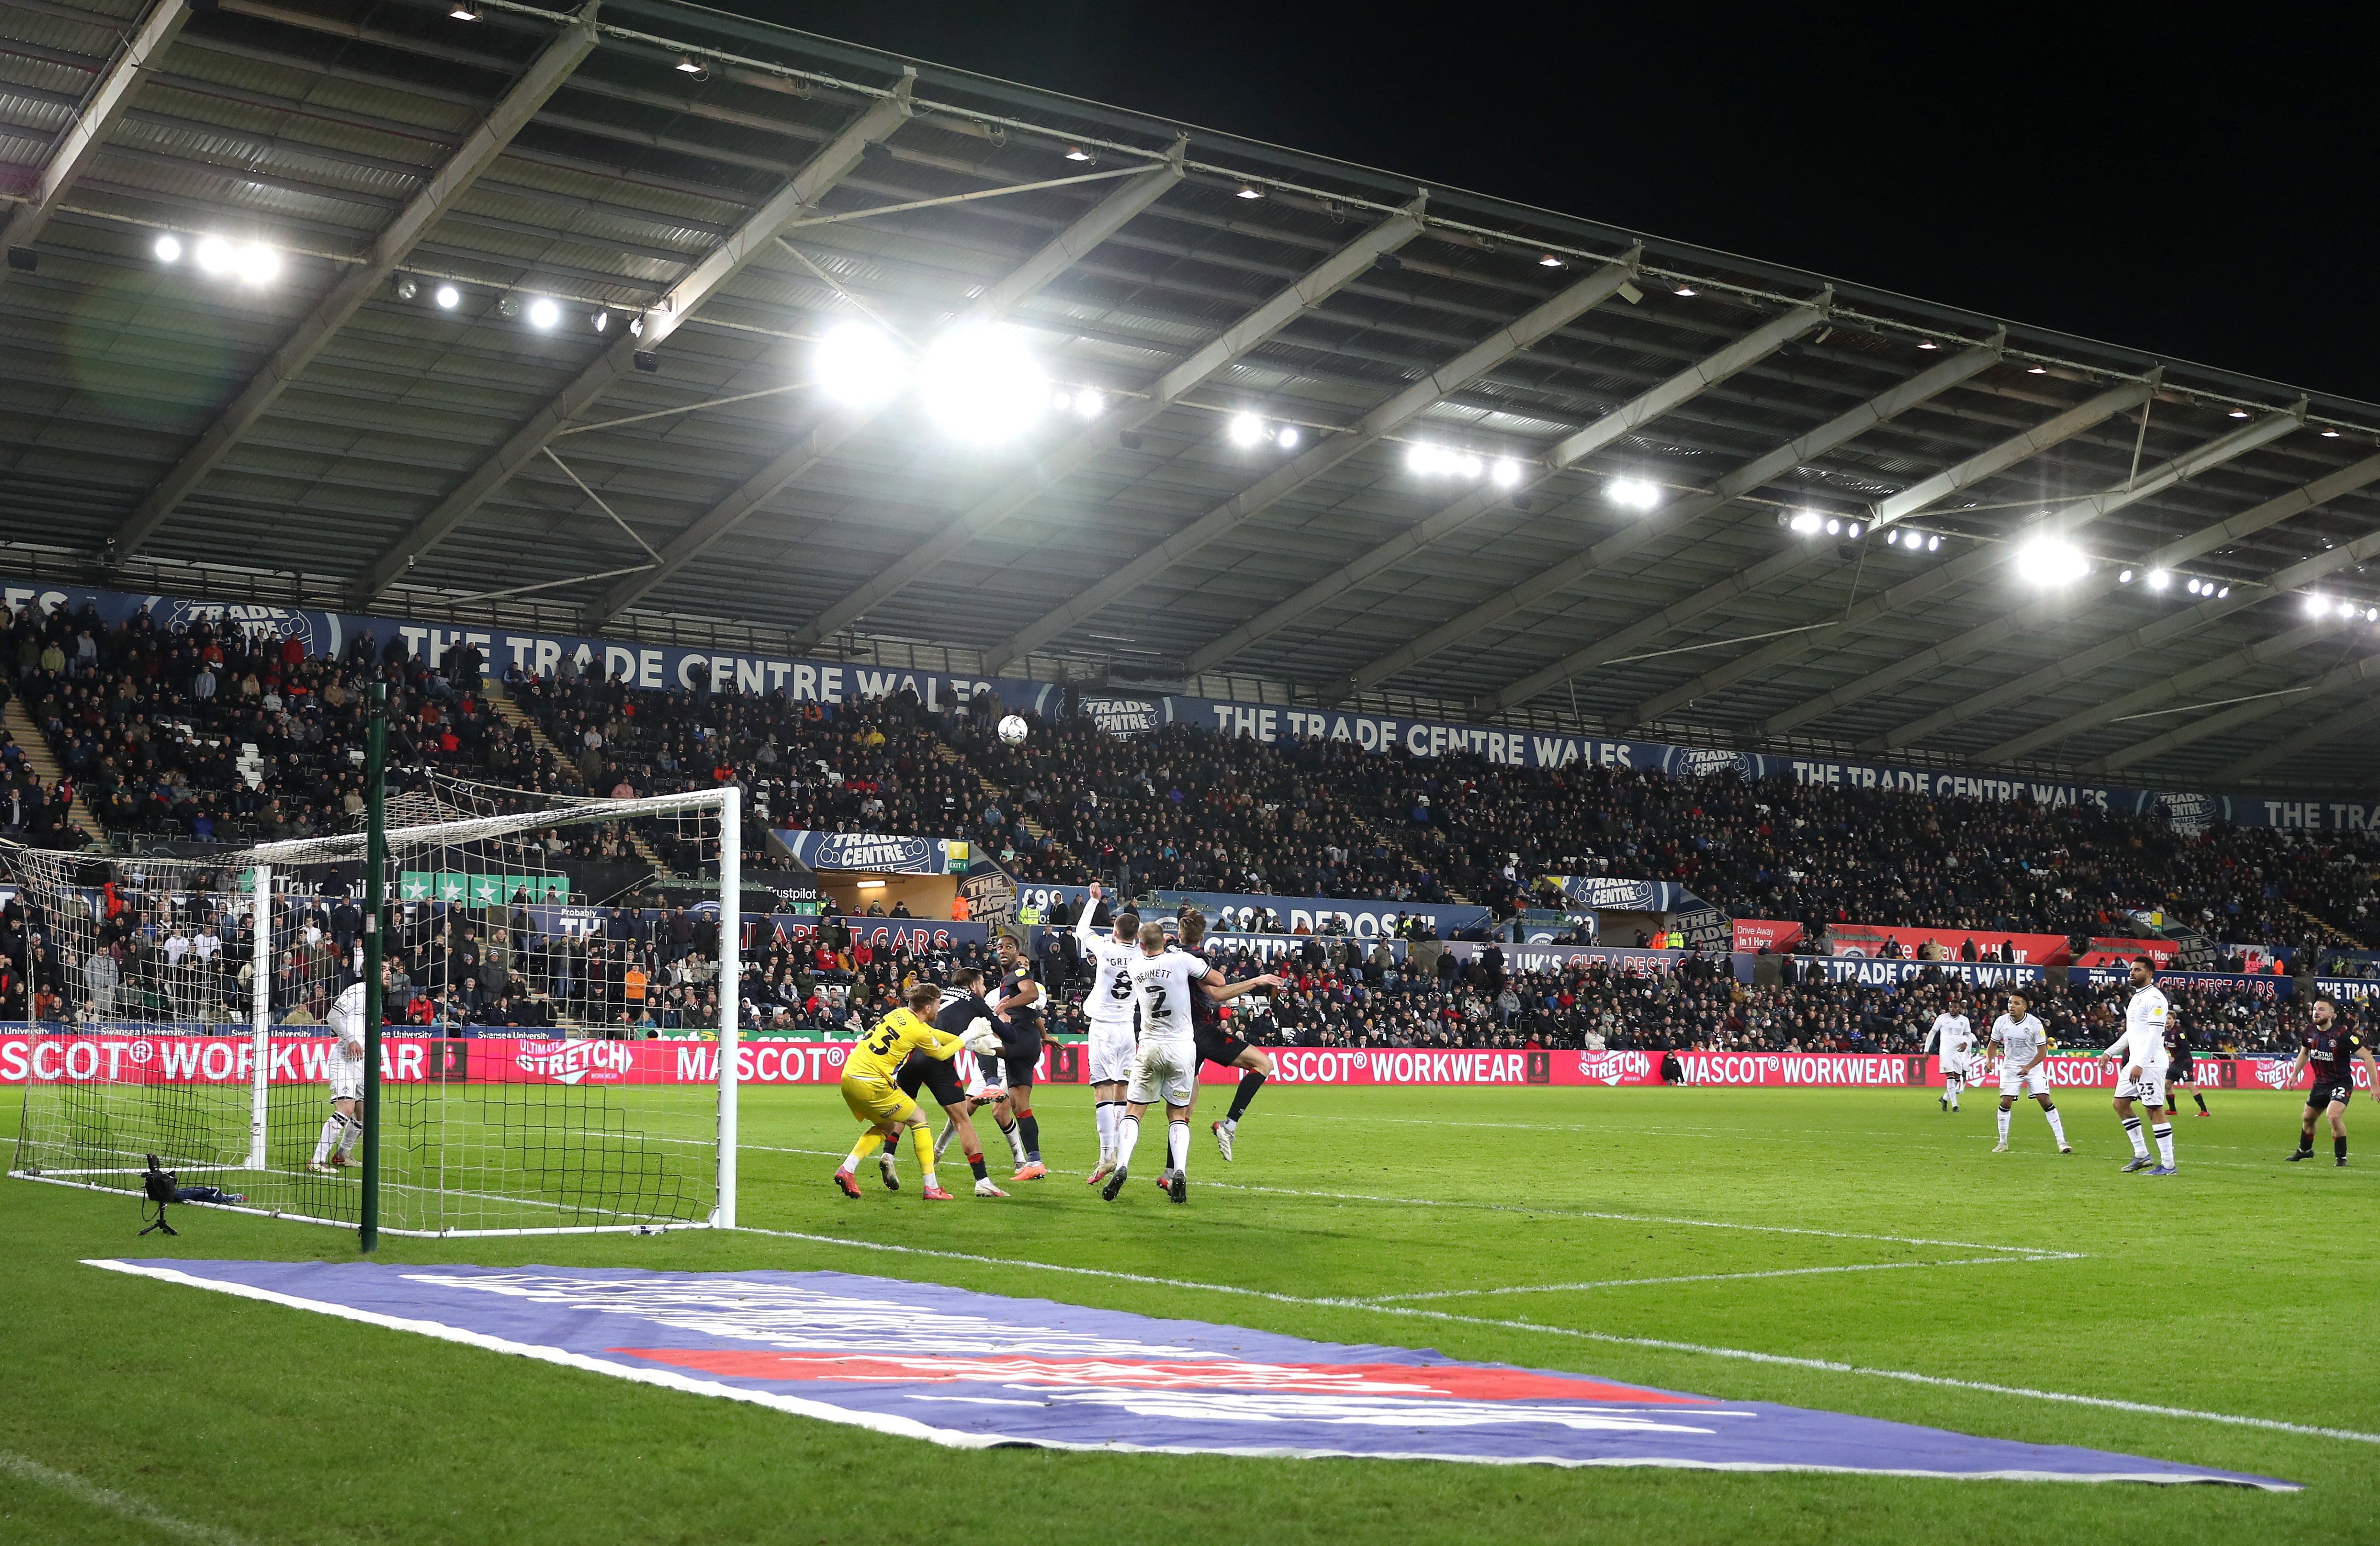 Swansea’s Championship clash with Bournemouth has been postponed because of storm damage to the Swansea.com Stadium